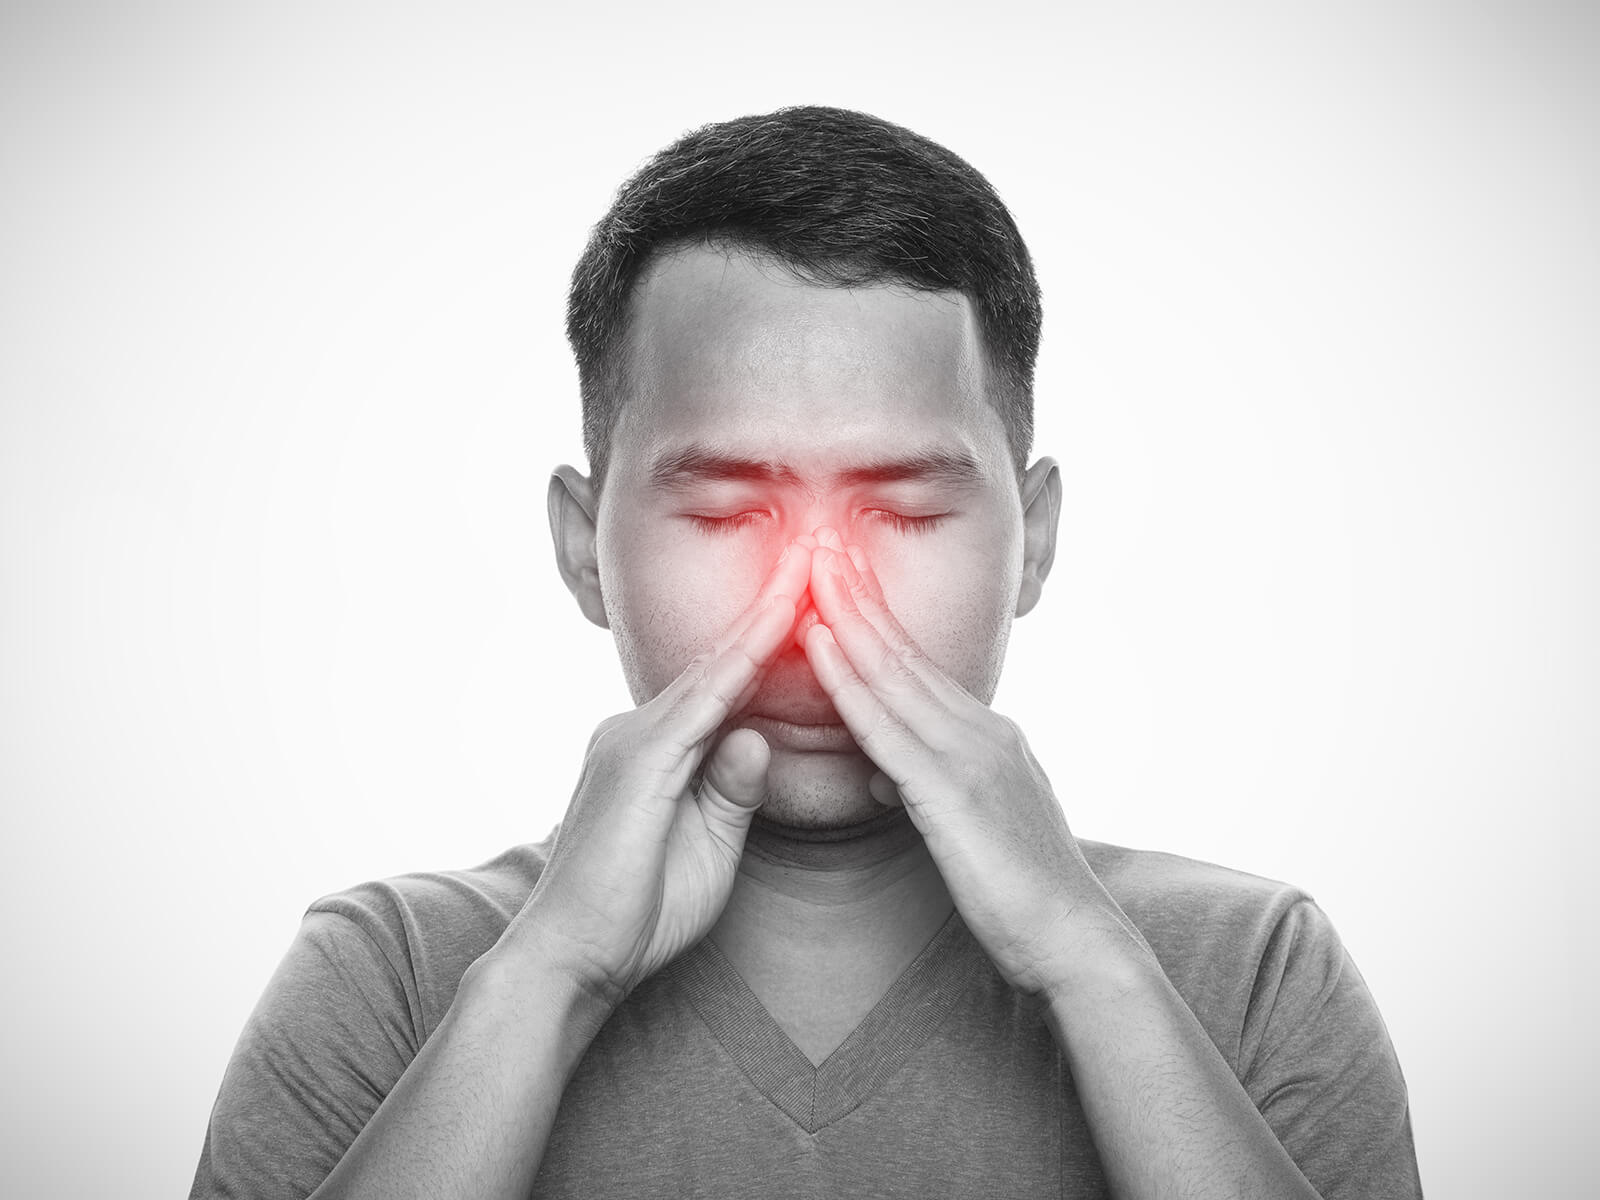 Sinus Problems After A Root Canal Treatment? What Could It Mean?